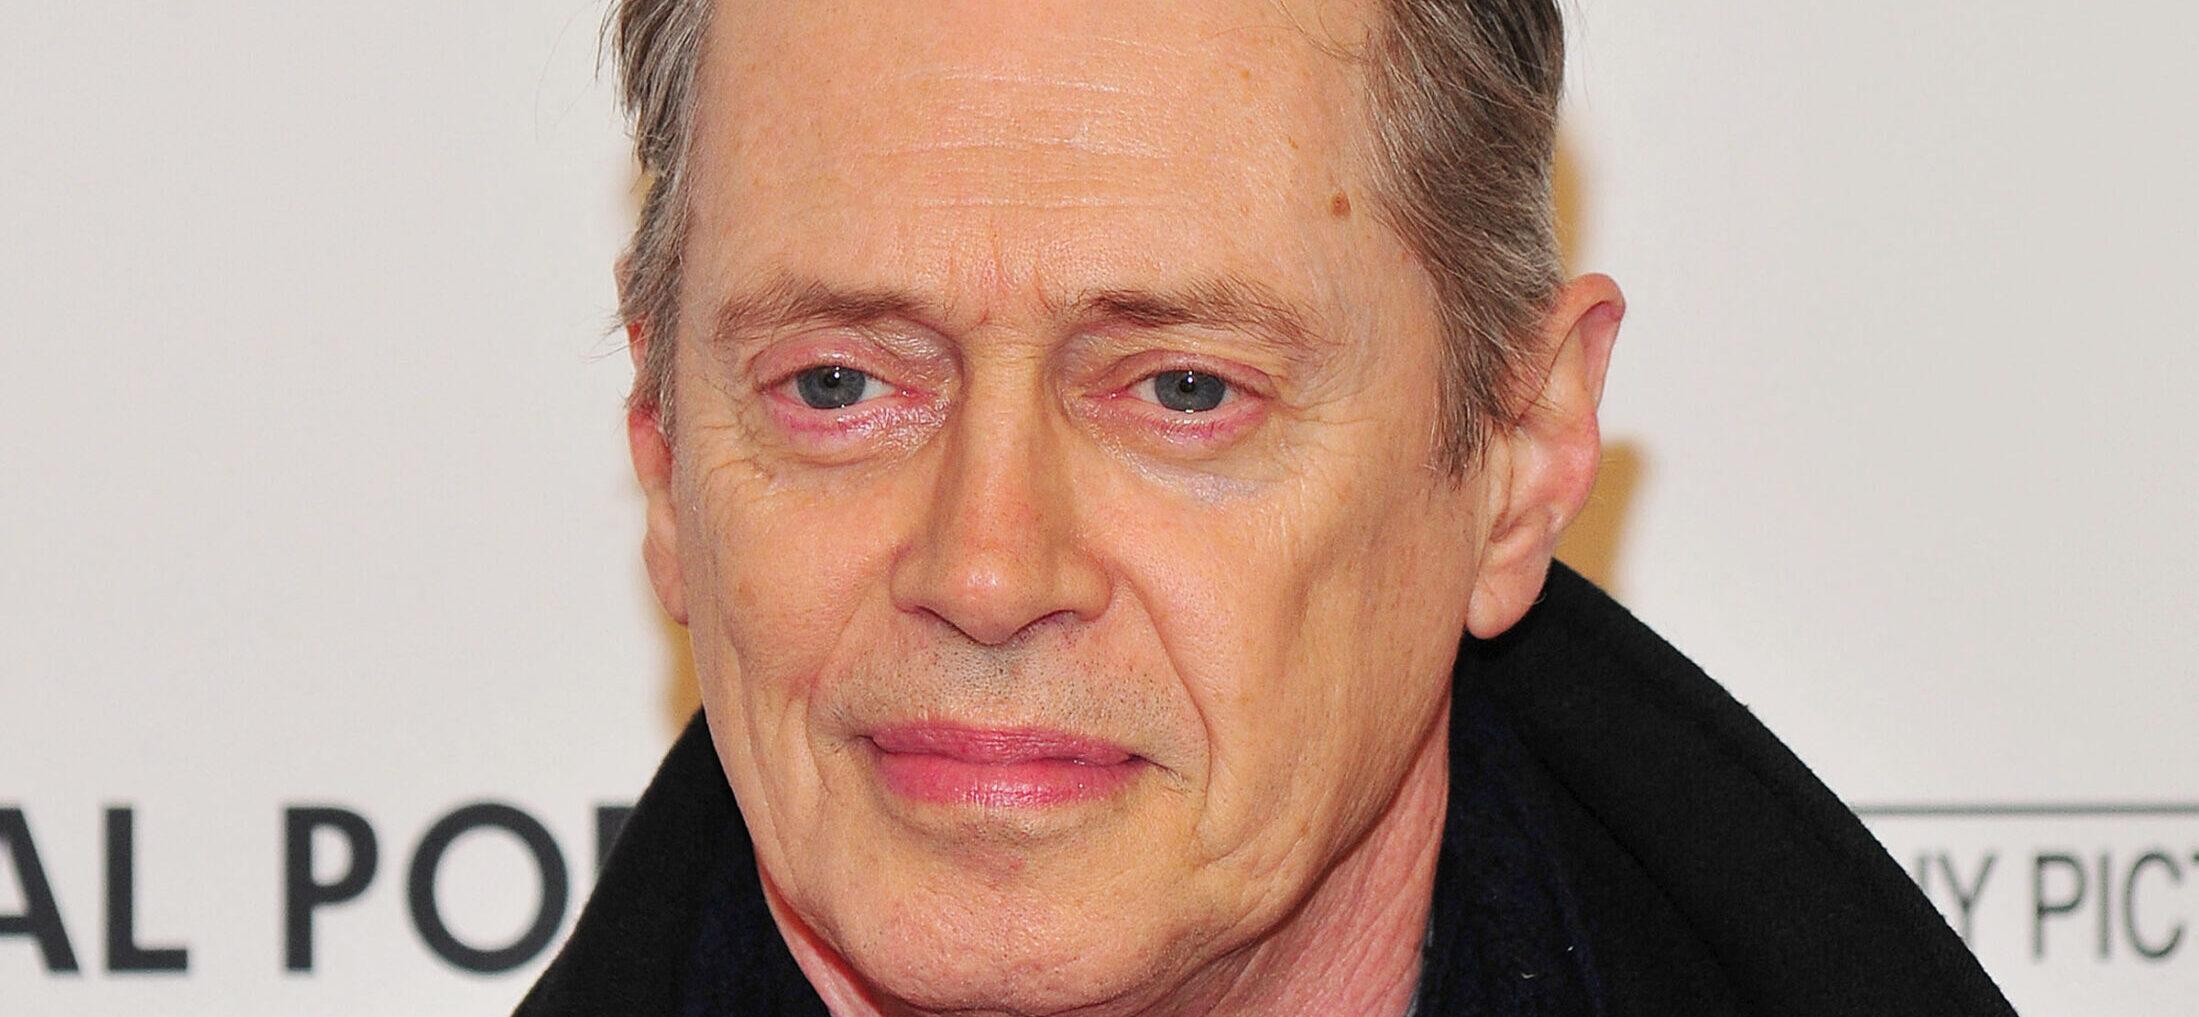 Eyewitness To Steve Buscemi’s Assault In New York City Speaks Out